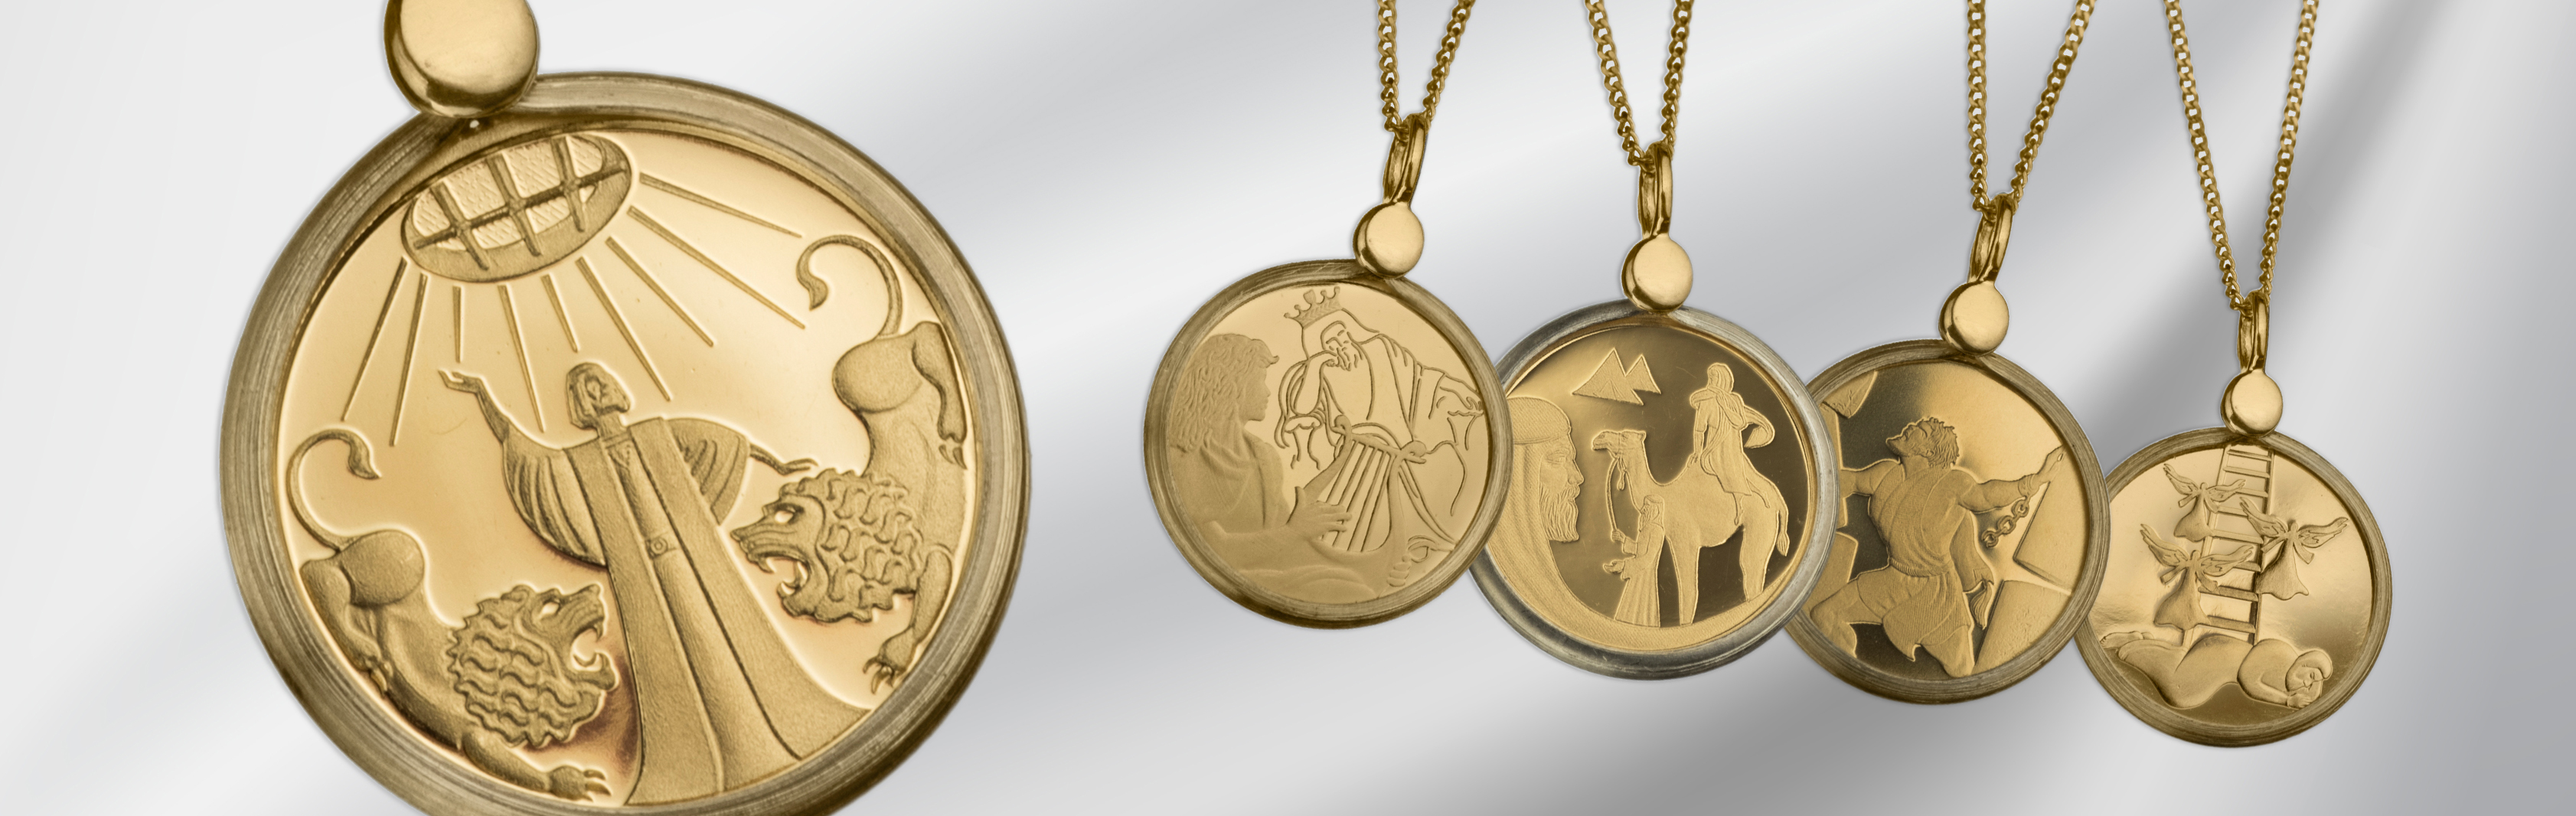 A 14k Gold Jewelry collection mounted with coins issued by the Bank of Israel. This collection presents an array of beloved collection coins including the ‘Wolf with the Lamb,’ ‘Parting of the Red Sea’, ‘Jonah in the Whale,’ and others from the Biblical A